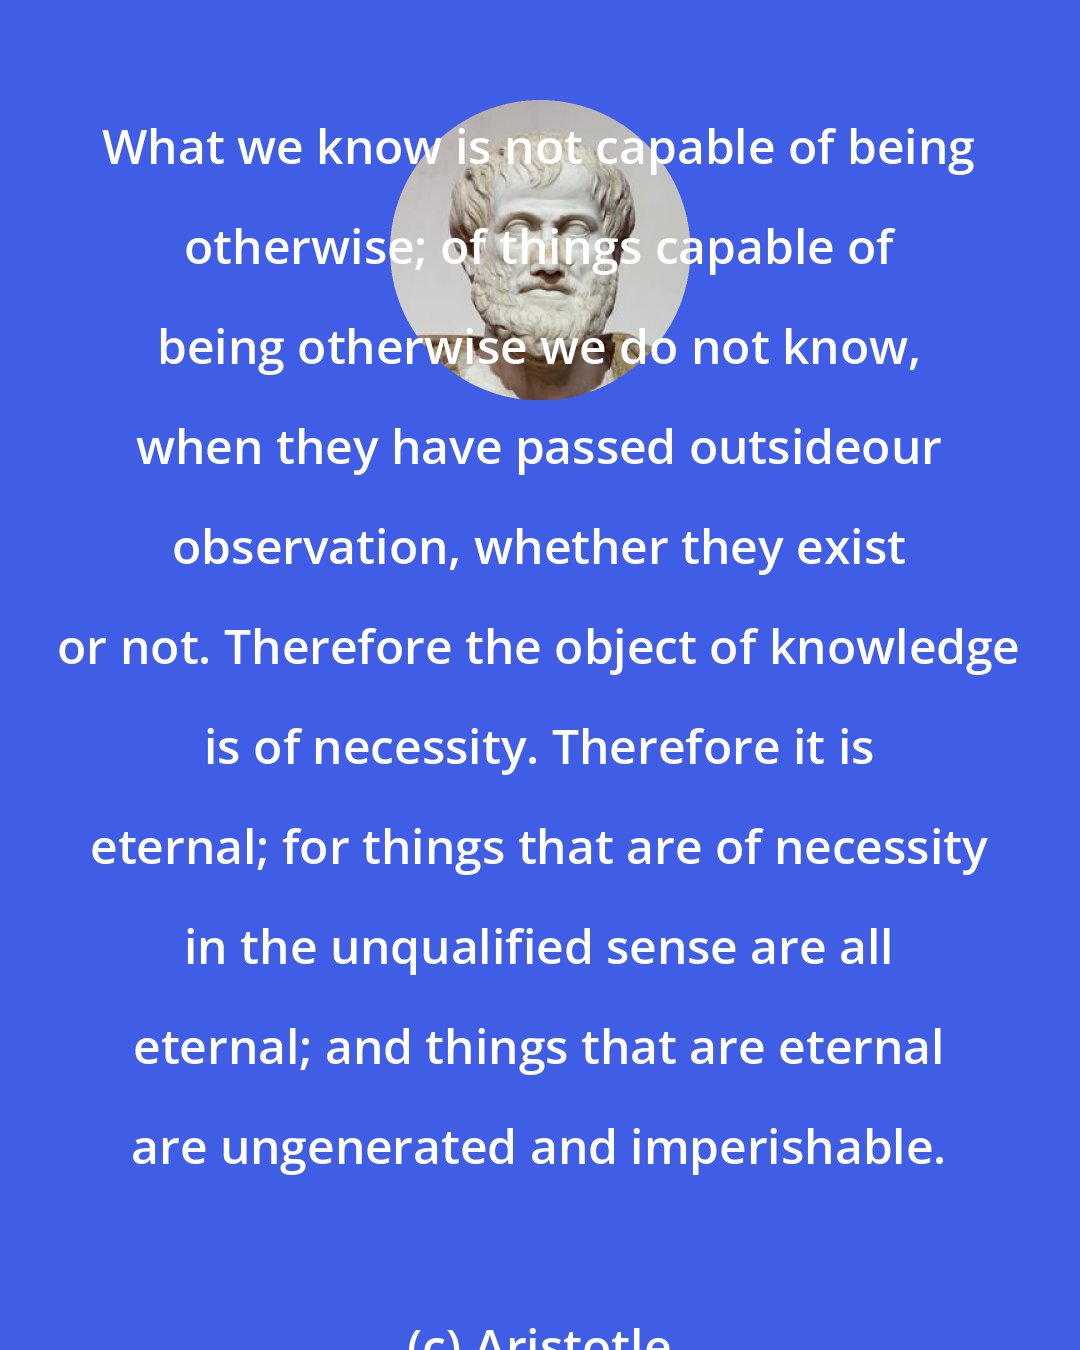 Aristotle: What we know is not capable of being otherwise; of things capable of being otherwise we do not know, when they have passed outsideour observation, whether they exist or not. Therefore the object of knowledge is of necessity. Therefore it is eternal; for things that are of necessity in the unqualified sense are all eternal; and things that are eternal are ungenerated and imperishable.